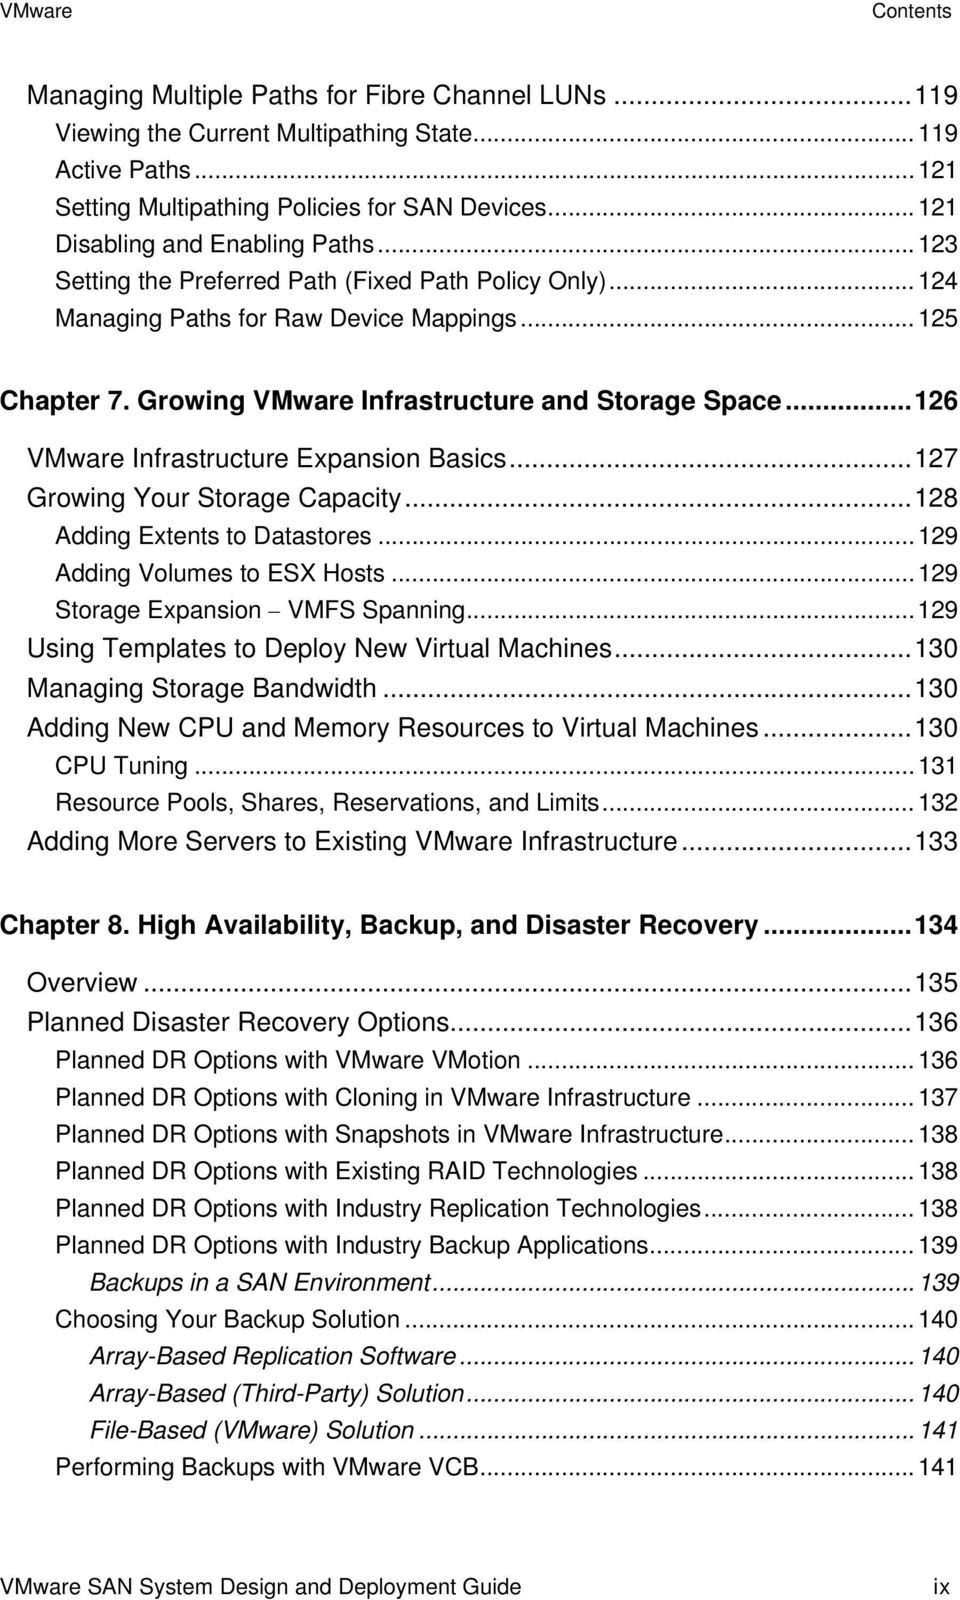 Growing VMware Infrastructure and Storage Space...126 VMware Infrastructure Expansion Basics...127 Growing Your Storage Capacity...128 Adding Extents to Datastores...129 Adding Volumes to ESX Hosts.